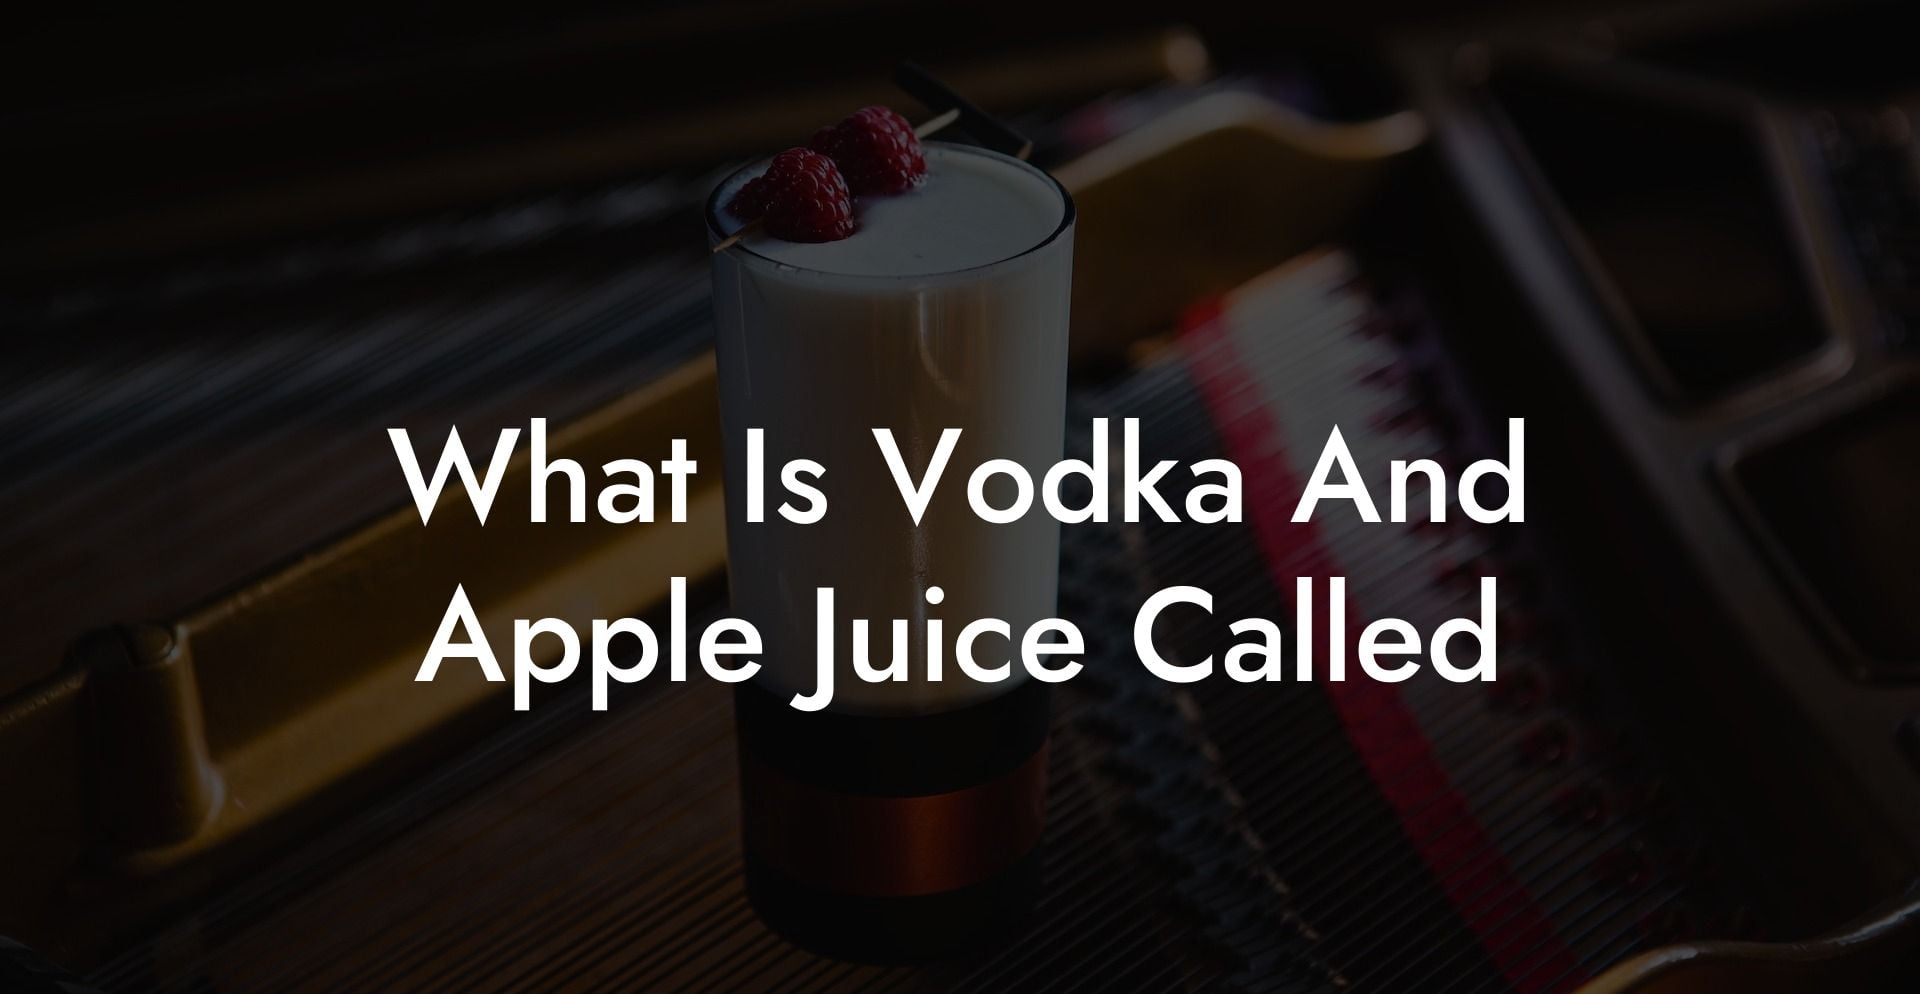 What Is Vodka And Apple Juice Called